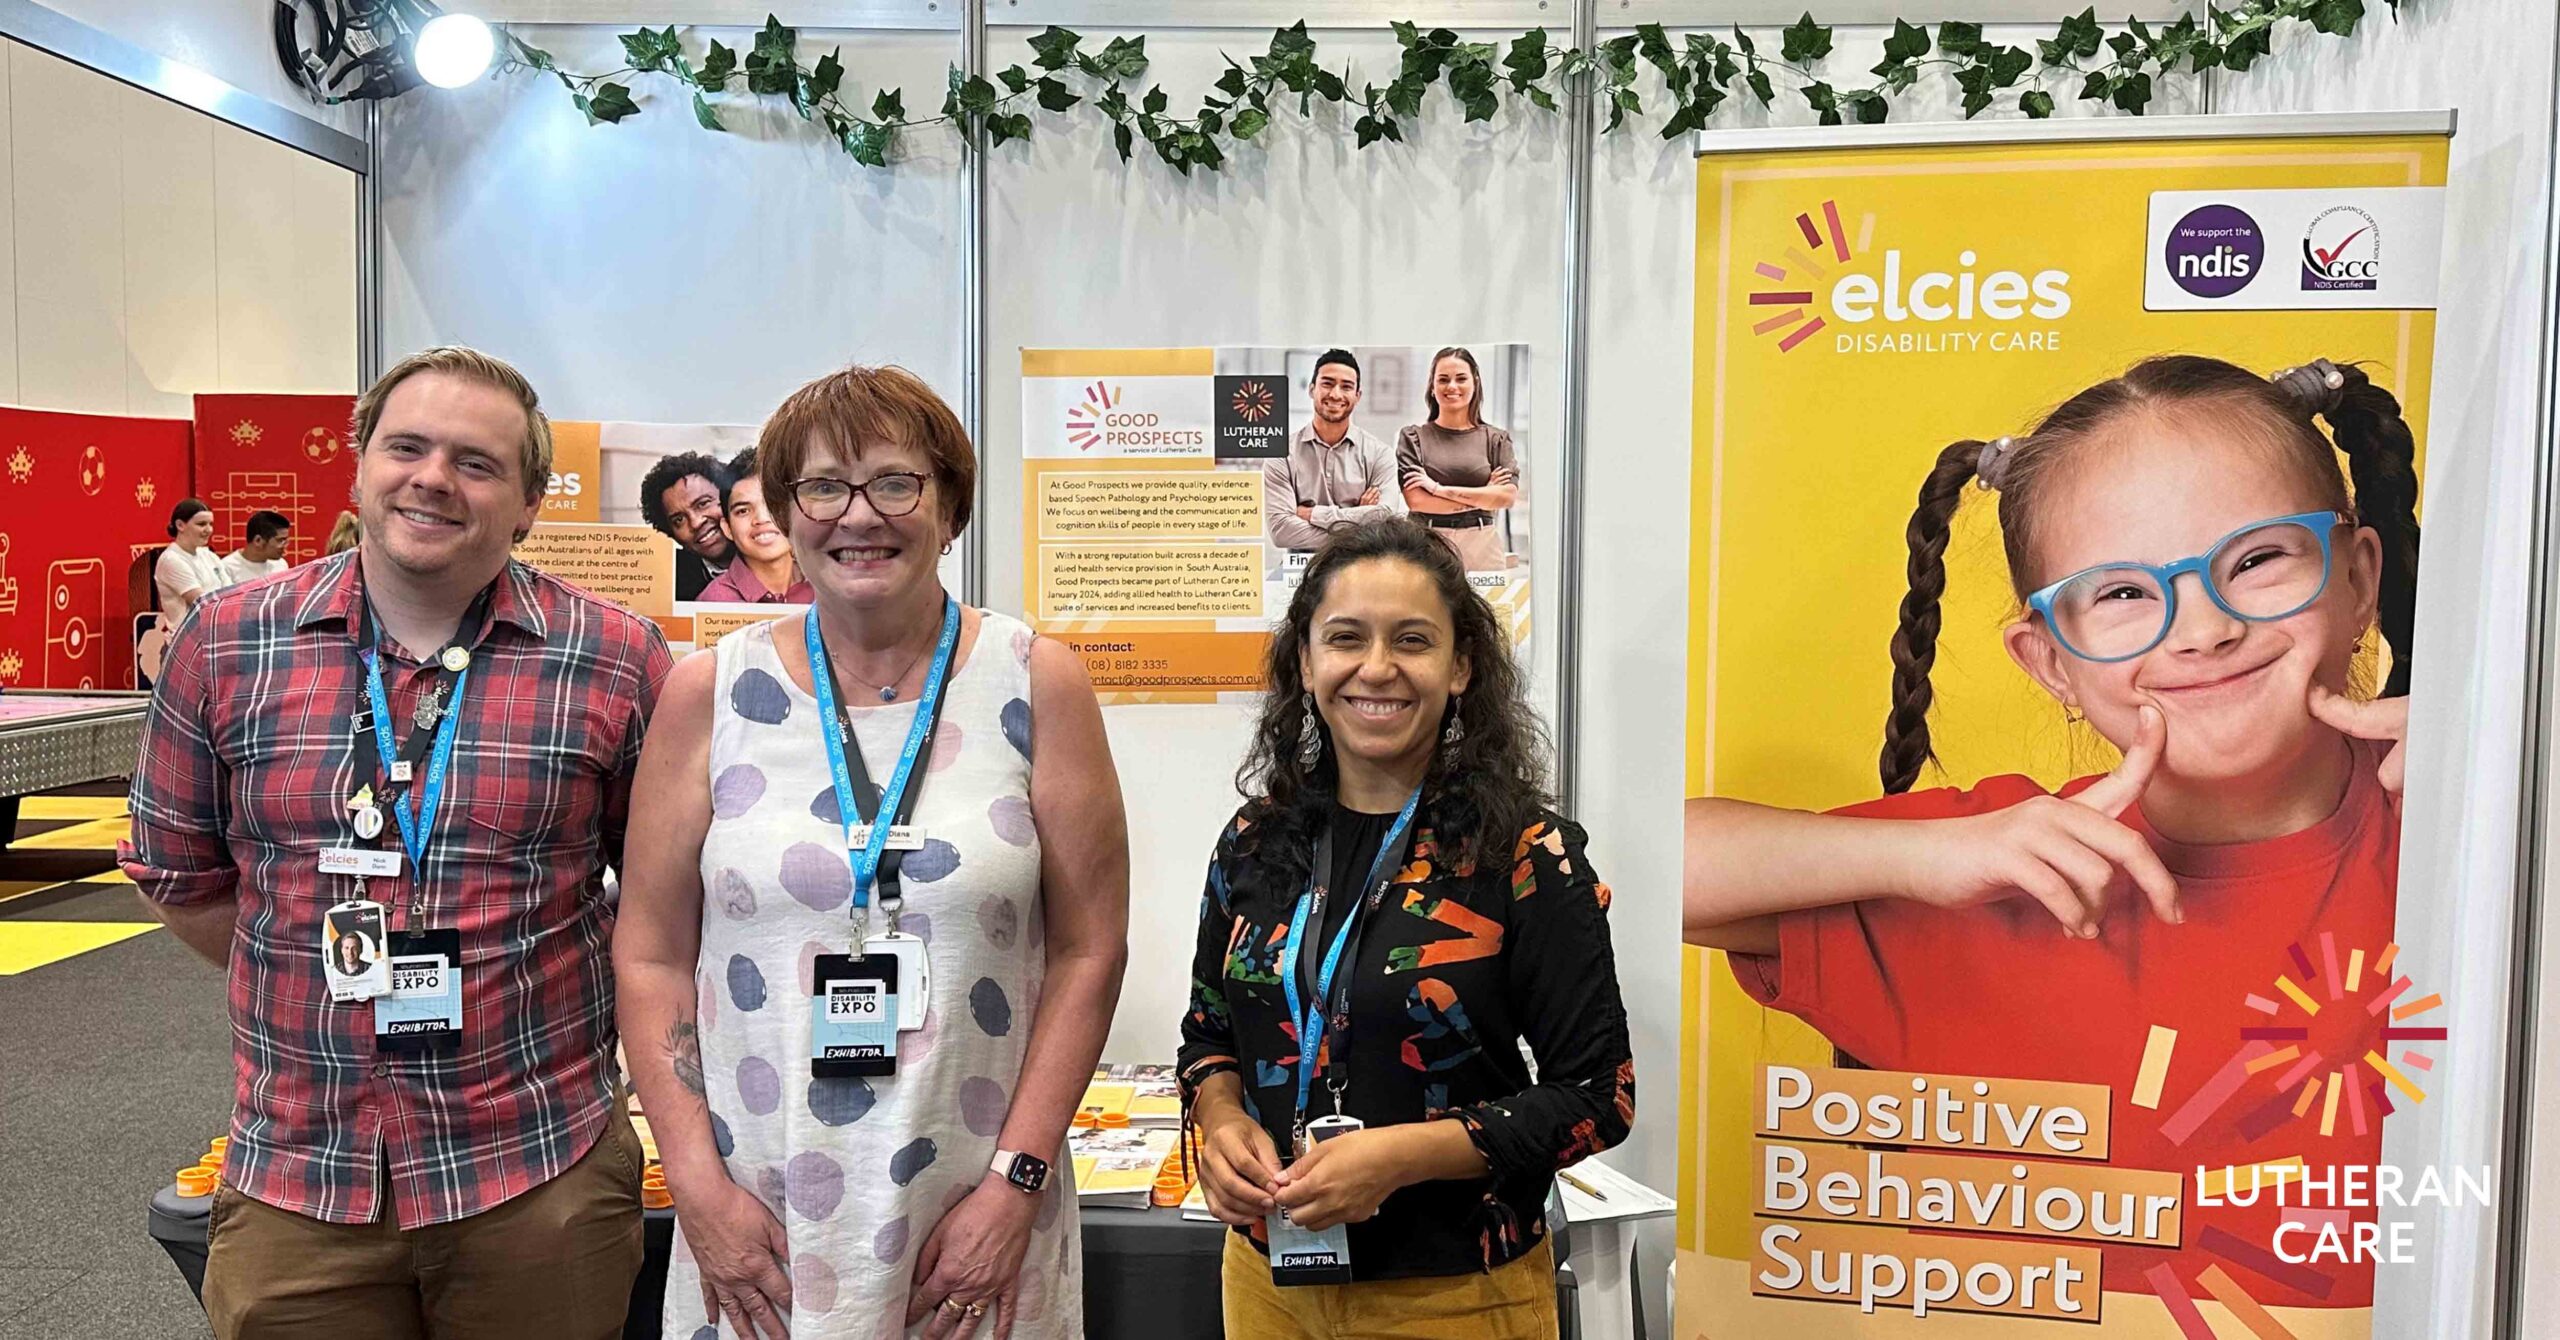 Elcies Disability Care and Good Prospects staff at the Source Kids Expo. The Lutheran Care logo appears in the bottom right hand corner.